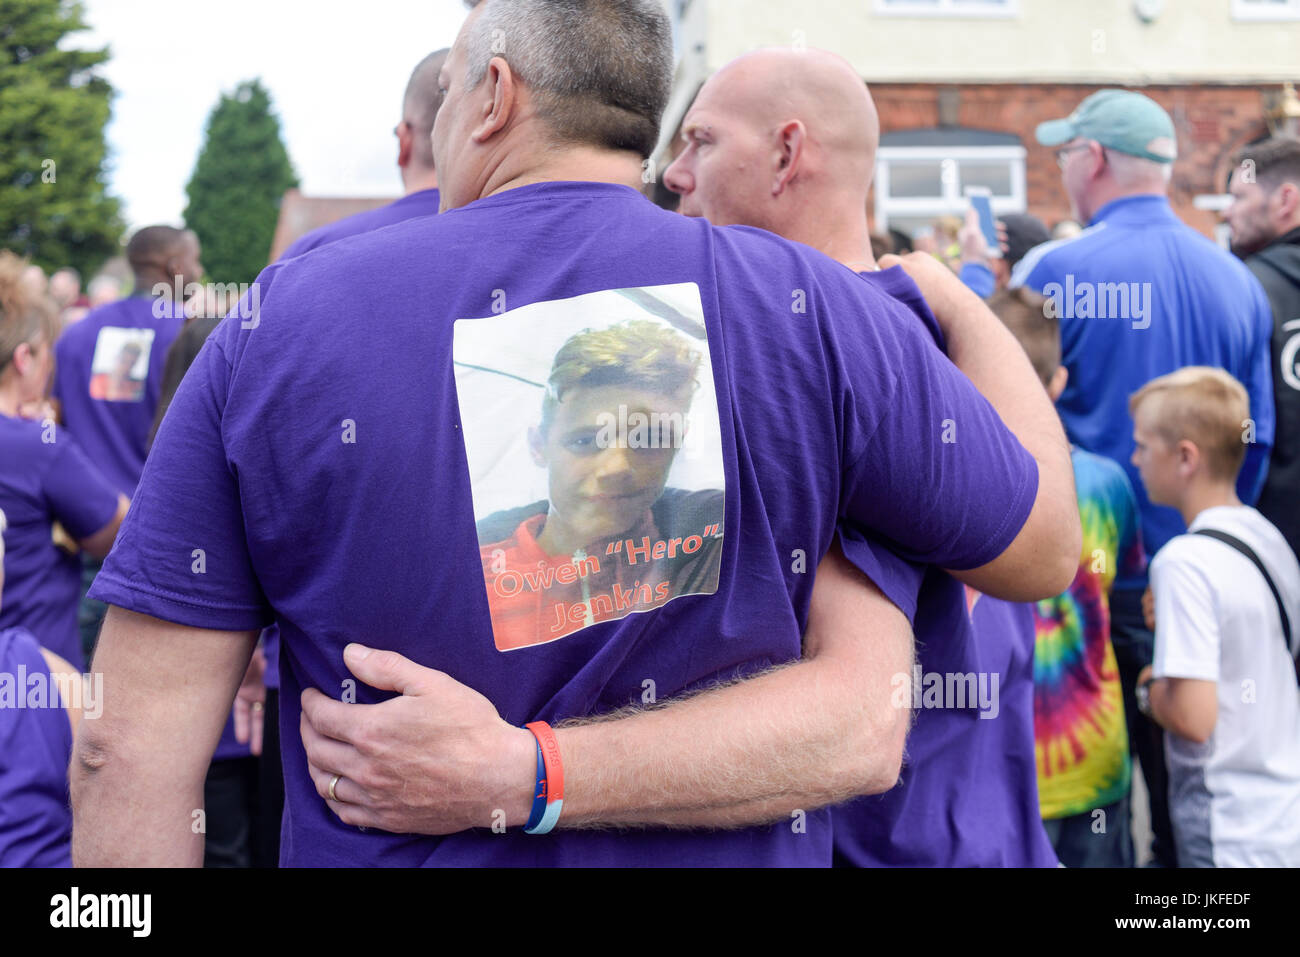 Beeston, Nottinghamshire, UK. 23rd July 2017. Nottinghamshire bikers’ group, Nottz Bikerz held a charity motorcycle run for Owen Jenkins.Owen drowned in the river Trent trying to save a young girl who was in trouble in the water.Thousands of motorcyclist turn up along with members of the public and Owens family members.Owen's family lead parade all wearing purple his favourite colour. Credit: Ian Francis/Alamy Live News Stock Photo